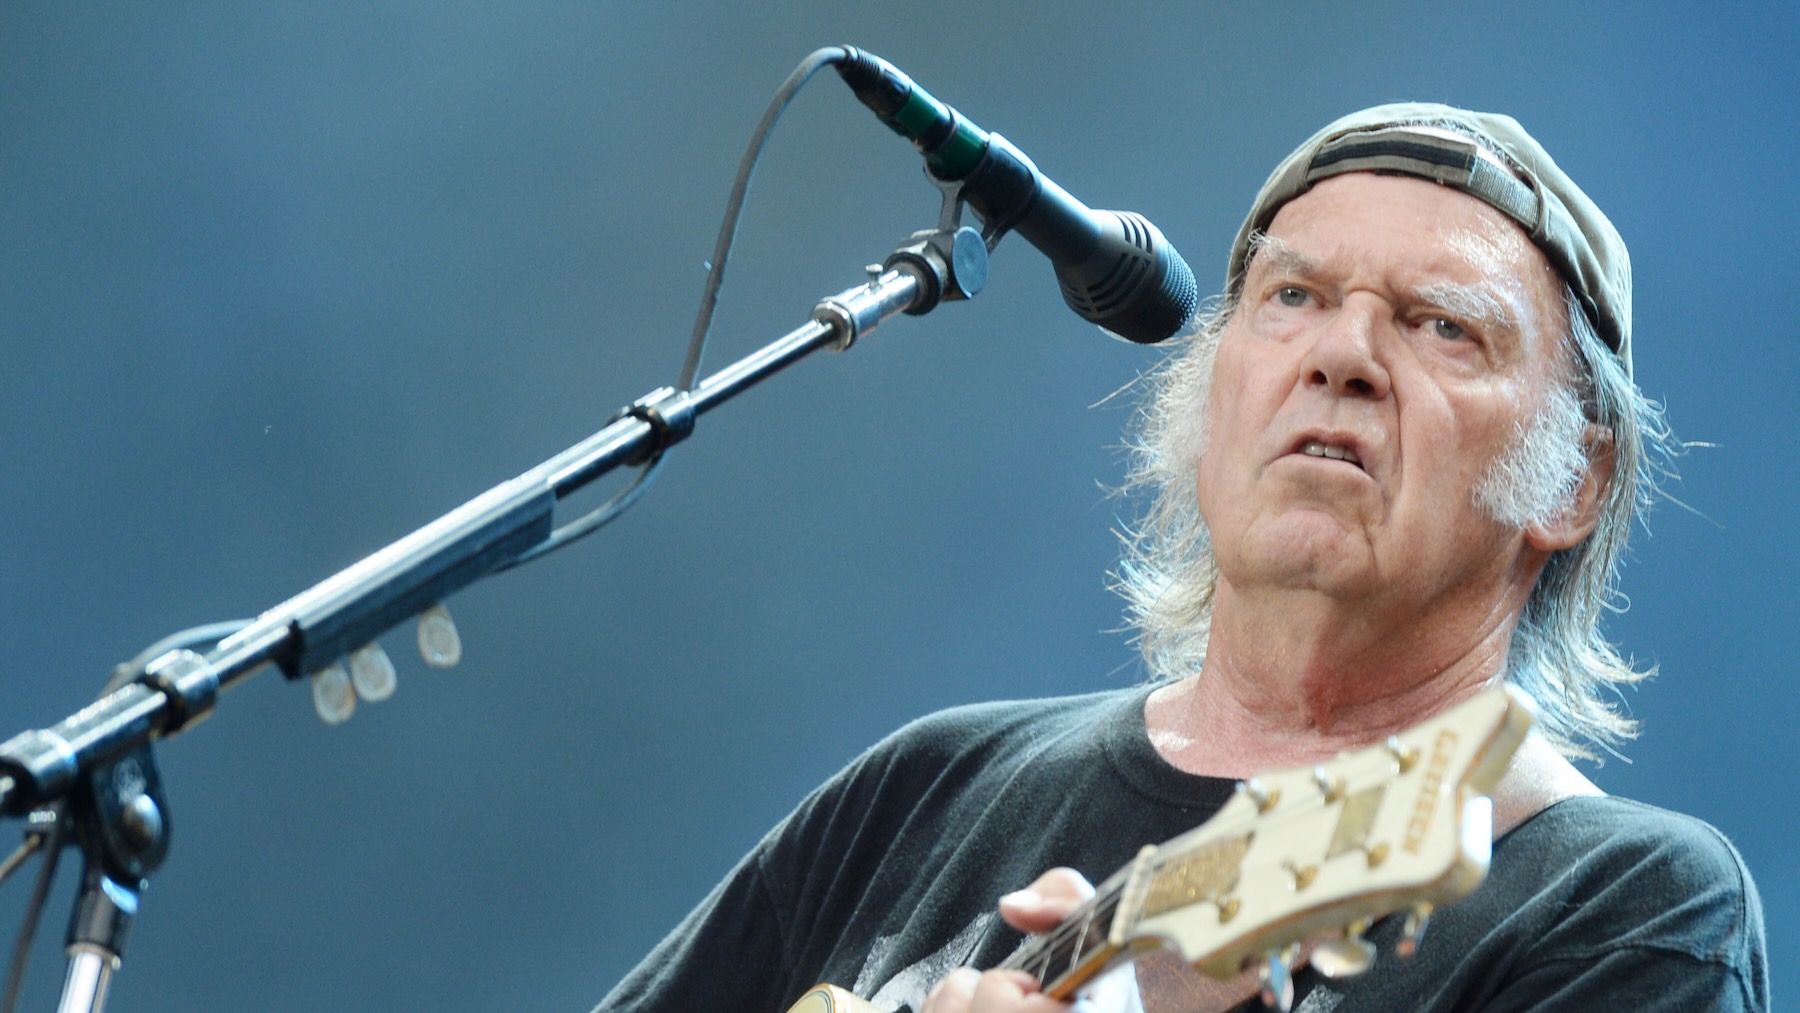 Neil Young + Crazy Horse Kick Off “Love Earth Tour” in San Diego: Setlist + Video